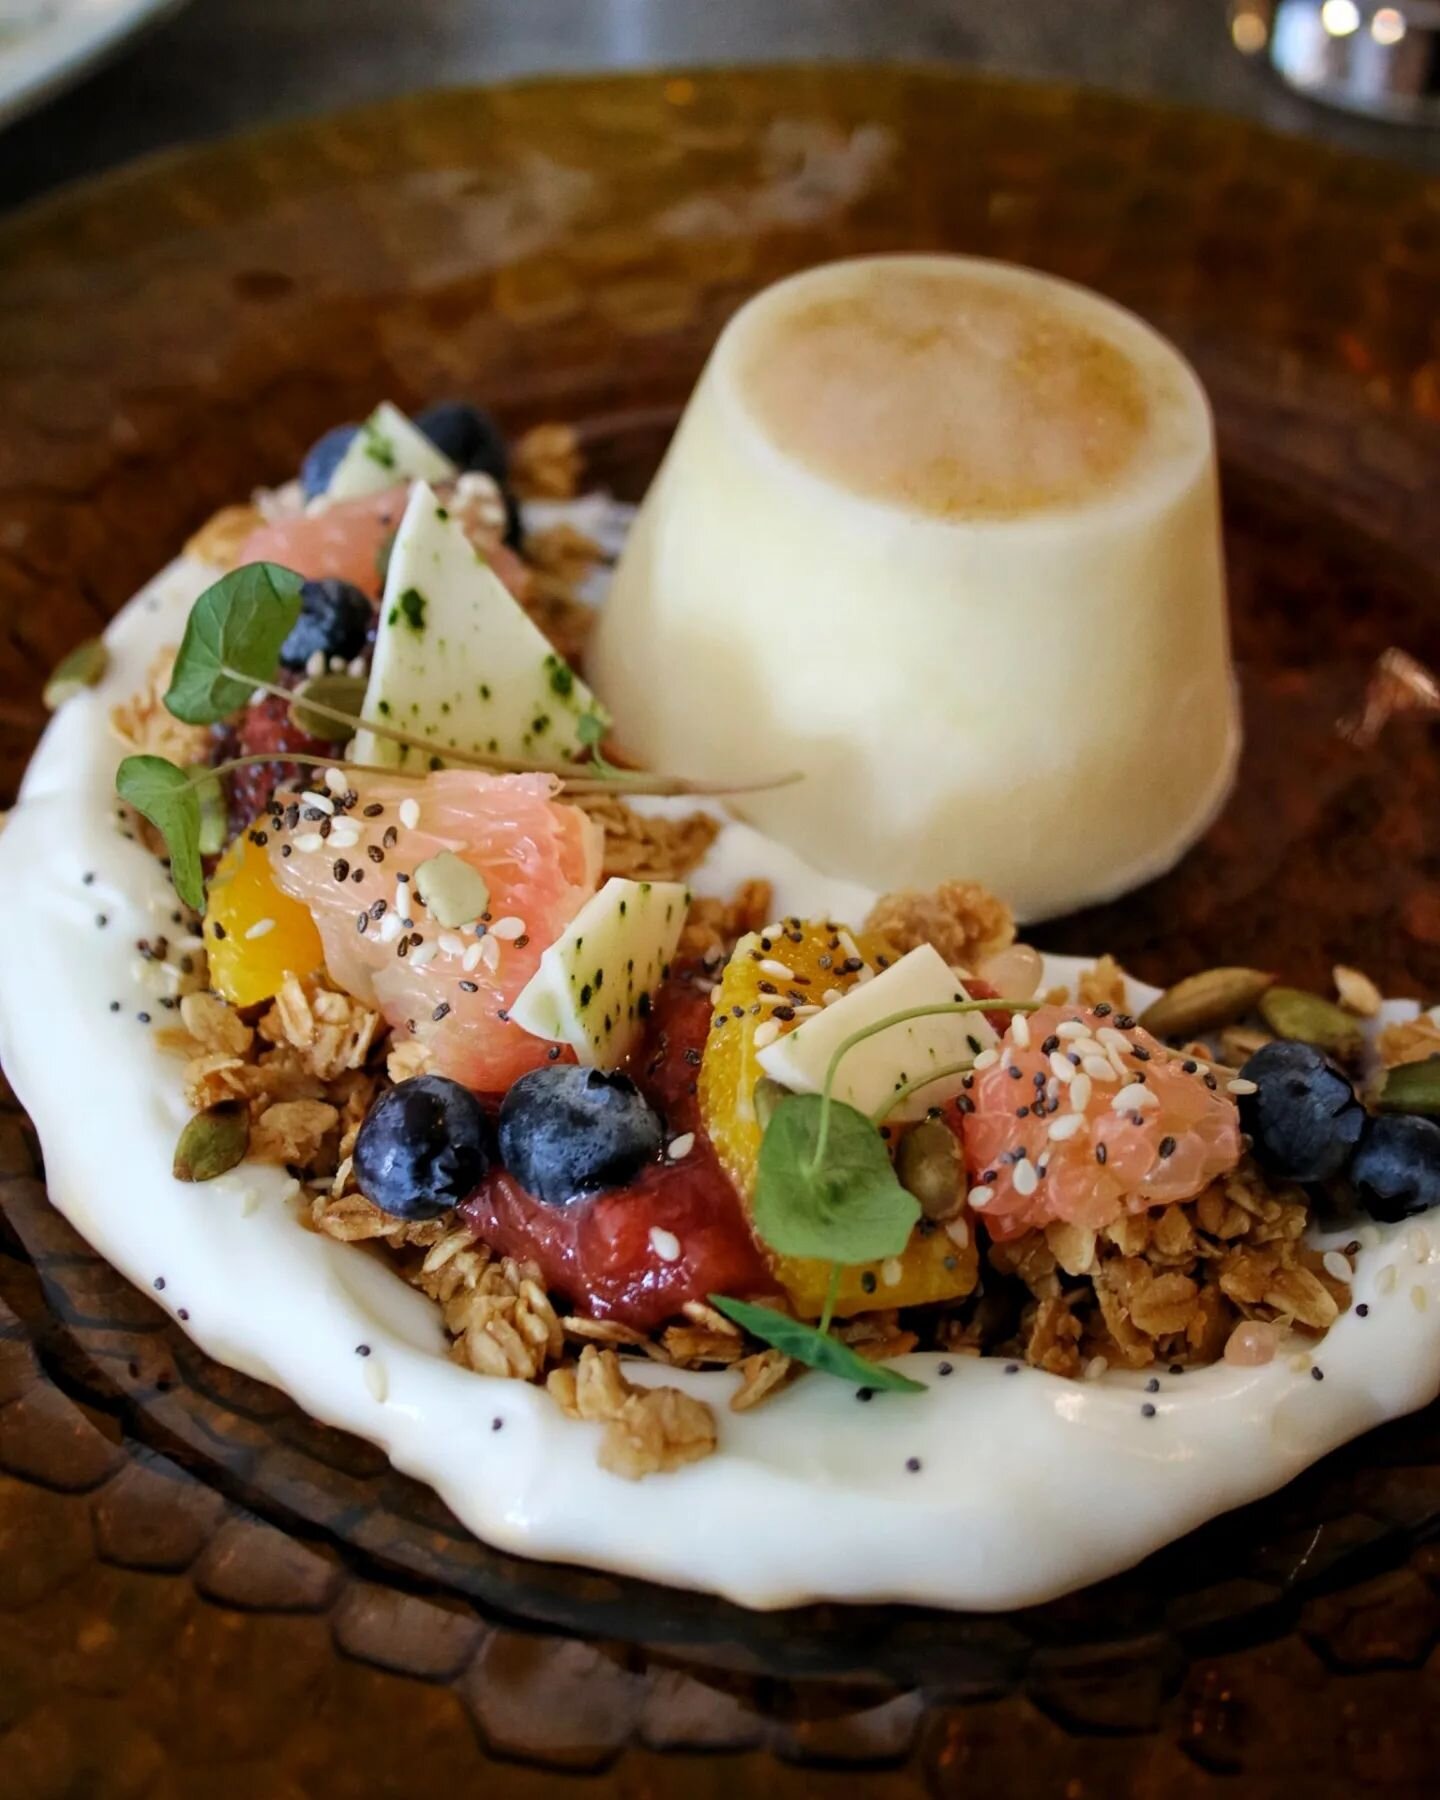 Four words to get you excited for brunch this weekend: Orange Cardamom Panna Cotta 😍

Honey roasted granola? Yes, please! Greek yogurt? Sign me up! And that green tea white chocolate? I can't even handle it.

It's like the perfect combination of swe